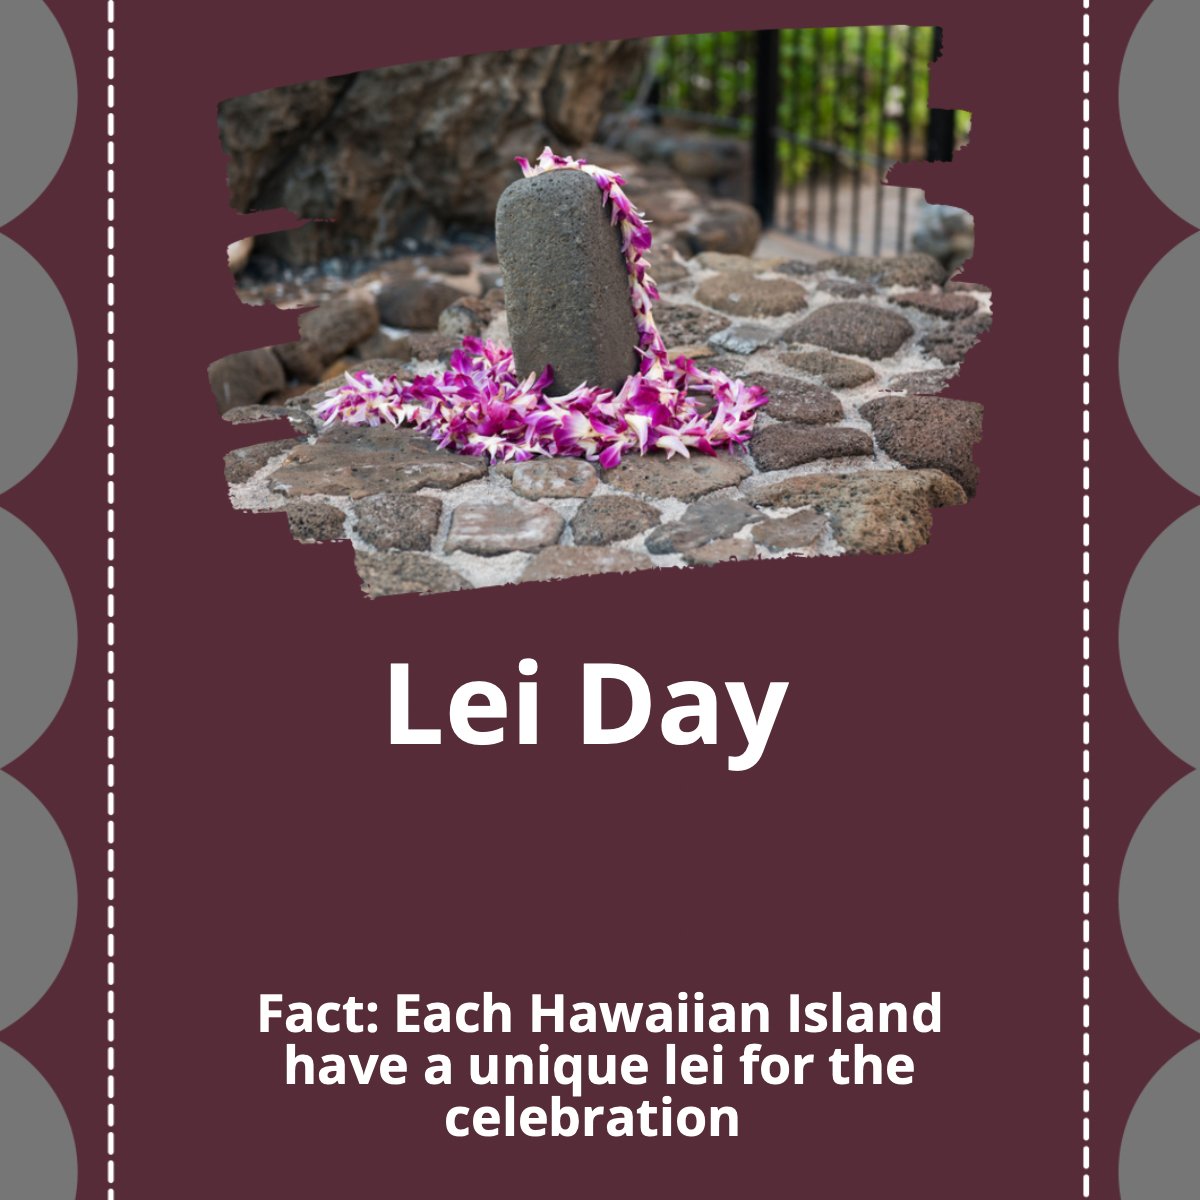 Happy Lei Day to all who celebrate 🙌!

Did you know? 🤔  Each Hawaiian island has a unique lei for the celebration. 😱

#lei #day #hawaii #flowers #celebration #grey
 #premierrealestatenetwork #pren #realestate #realtor #prescottquadcity #sedonaverdevalley